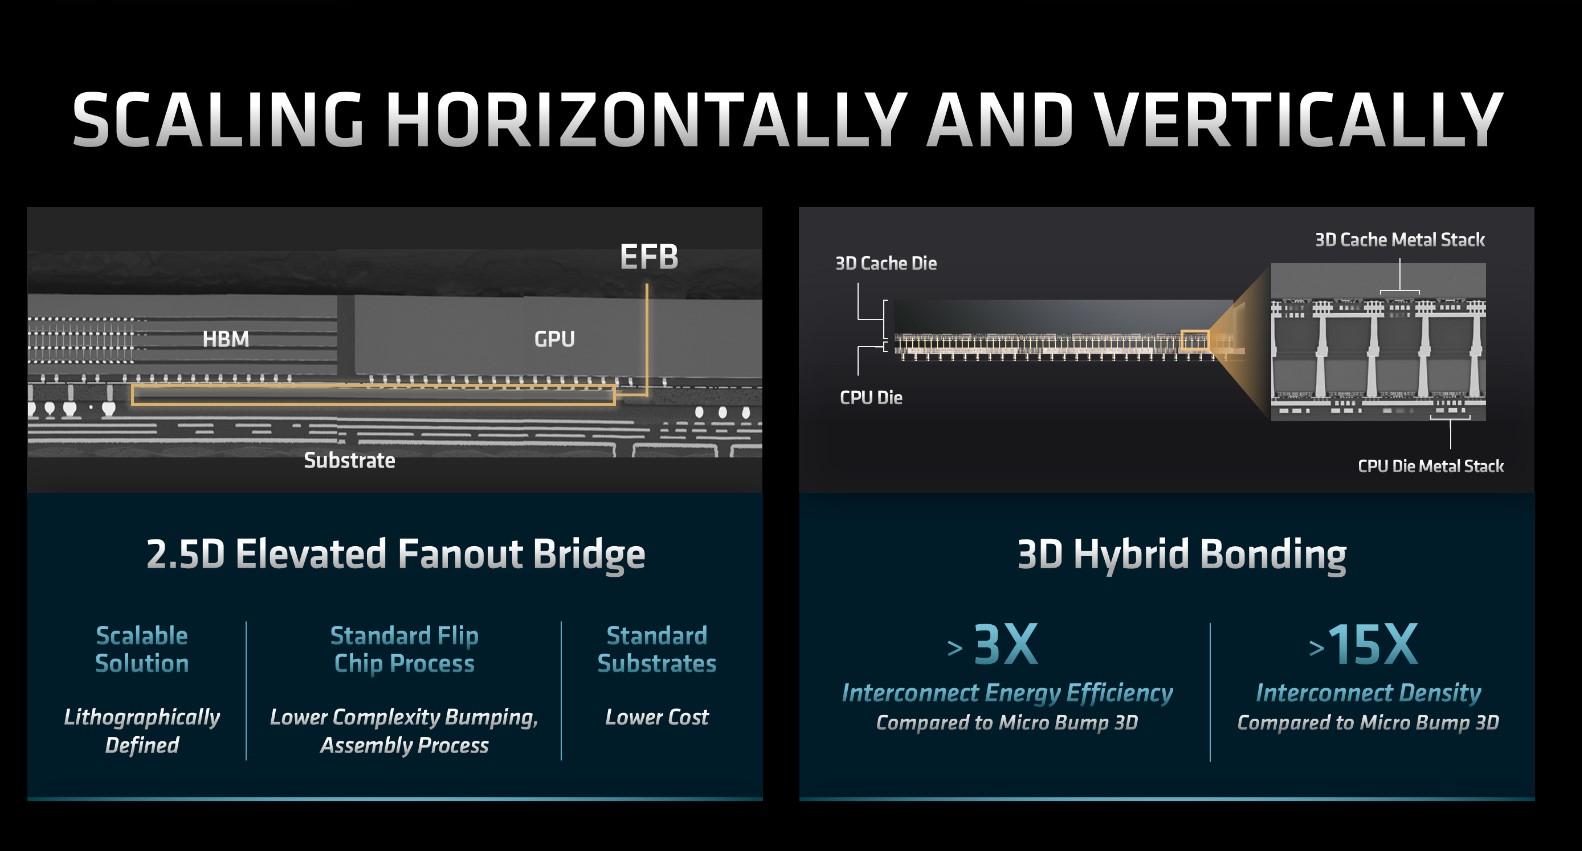 AMD FAD 2022 Design Innovation On High Performance Pace